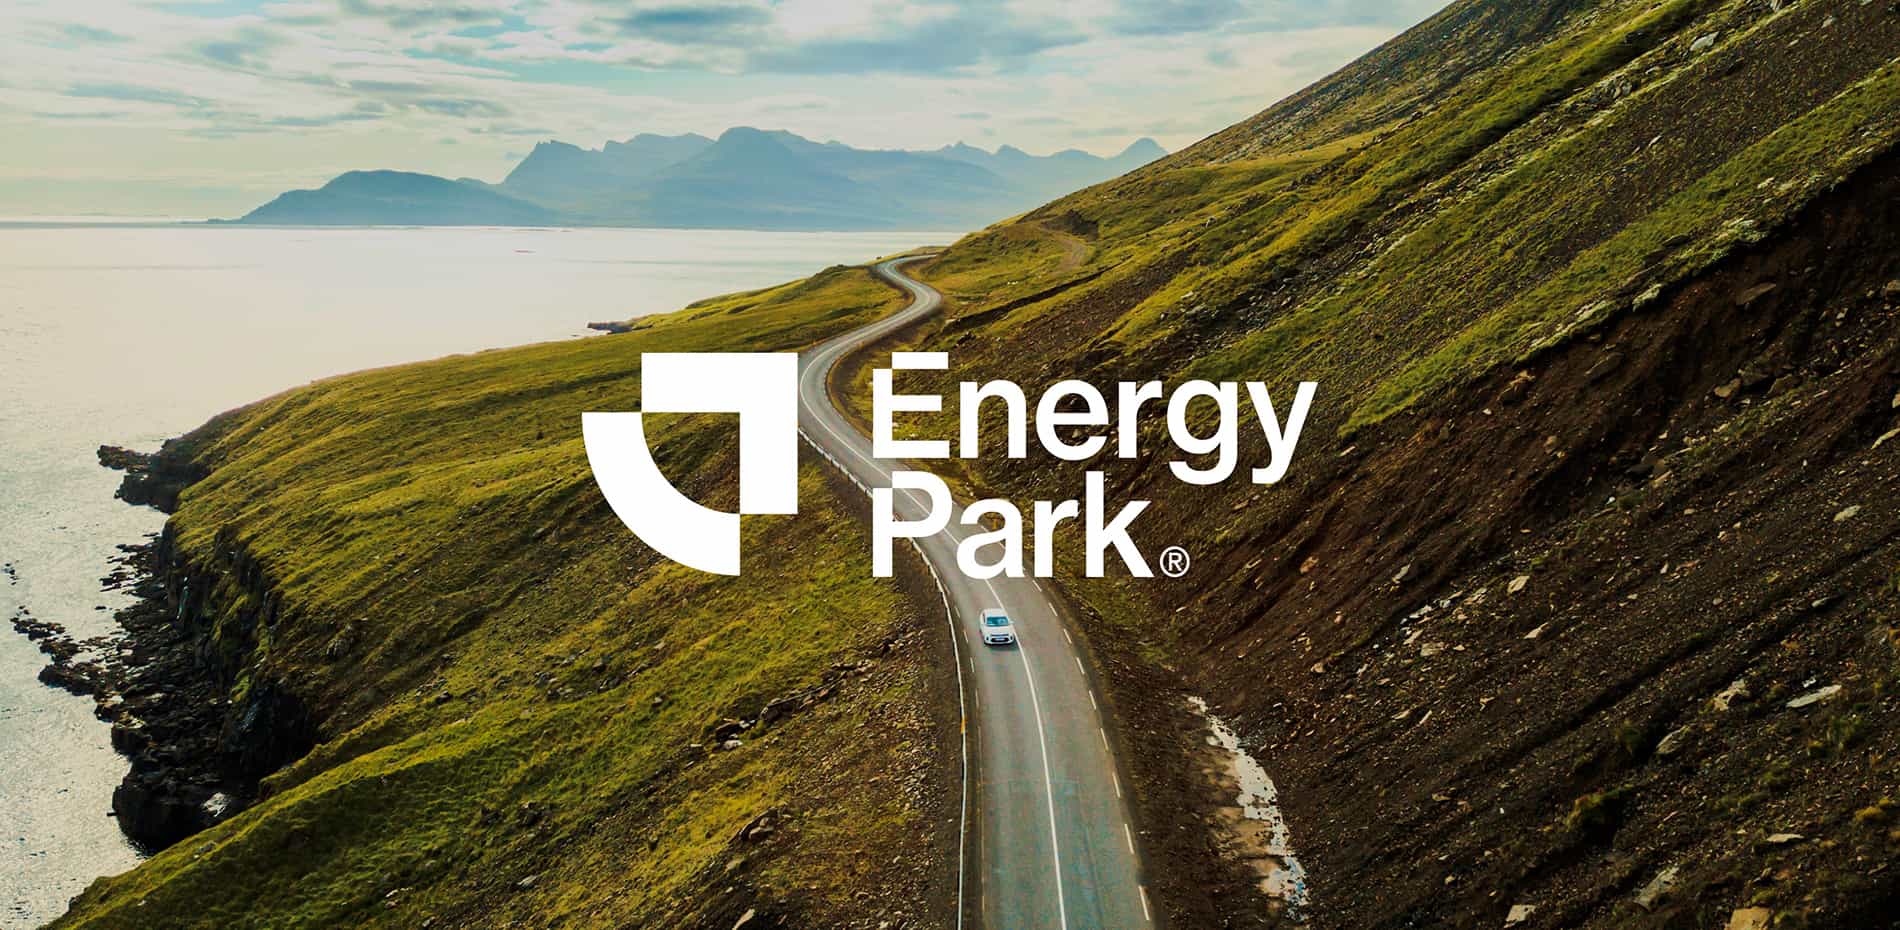 Energy Park - “Behind the scenes” Case Study